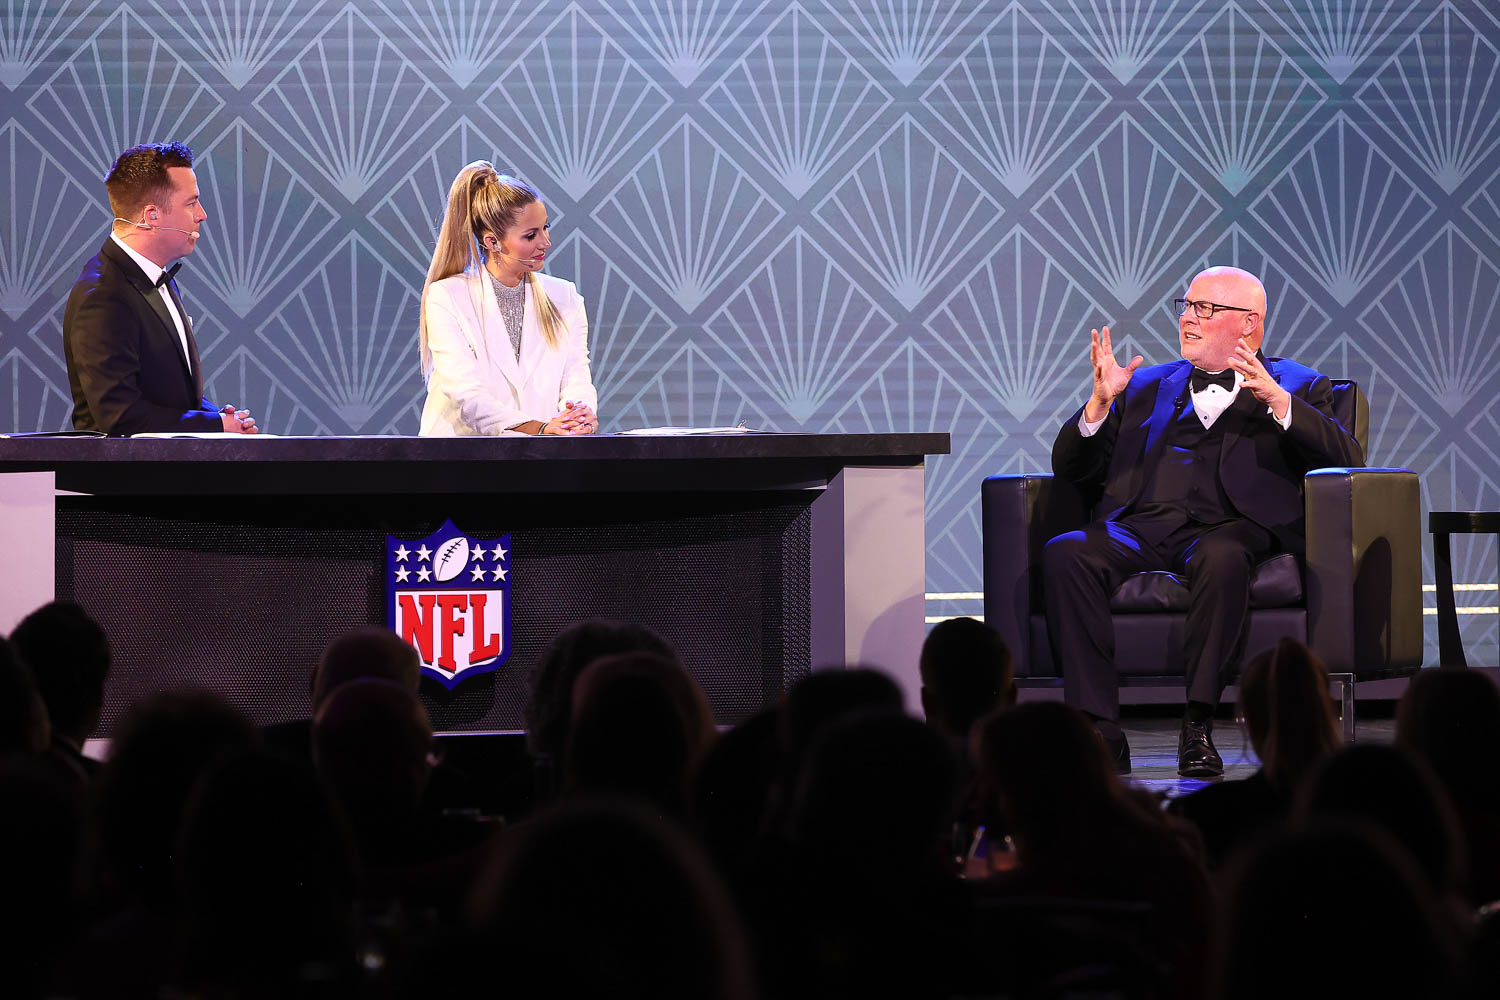 James Palmer and Laura Rutledge with Mike Madden who is receiving the Lamar Hunt Award for Professional Football for his late father John Madden during the 53rd annual 101 Awards at The Westin Crown Center in Kansas City, Missouri on Saturday, February 25, 2023.